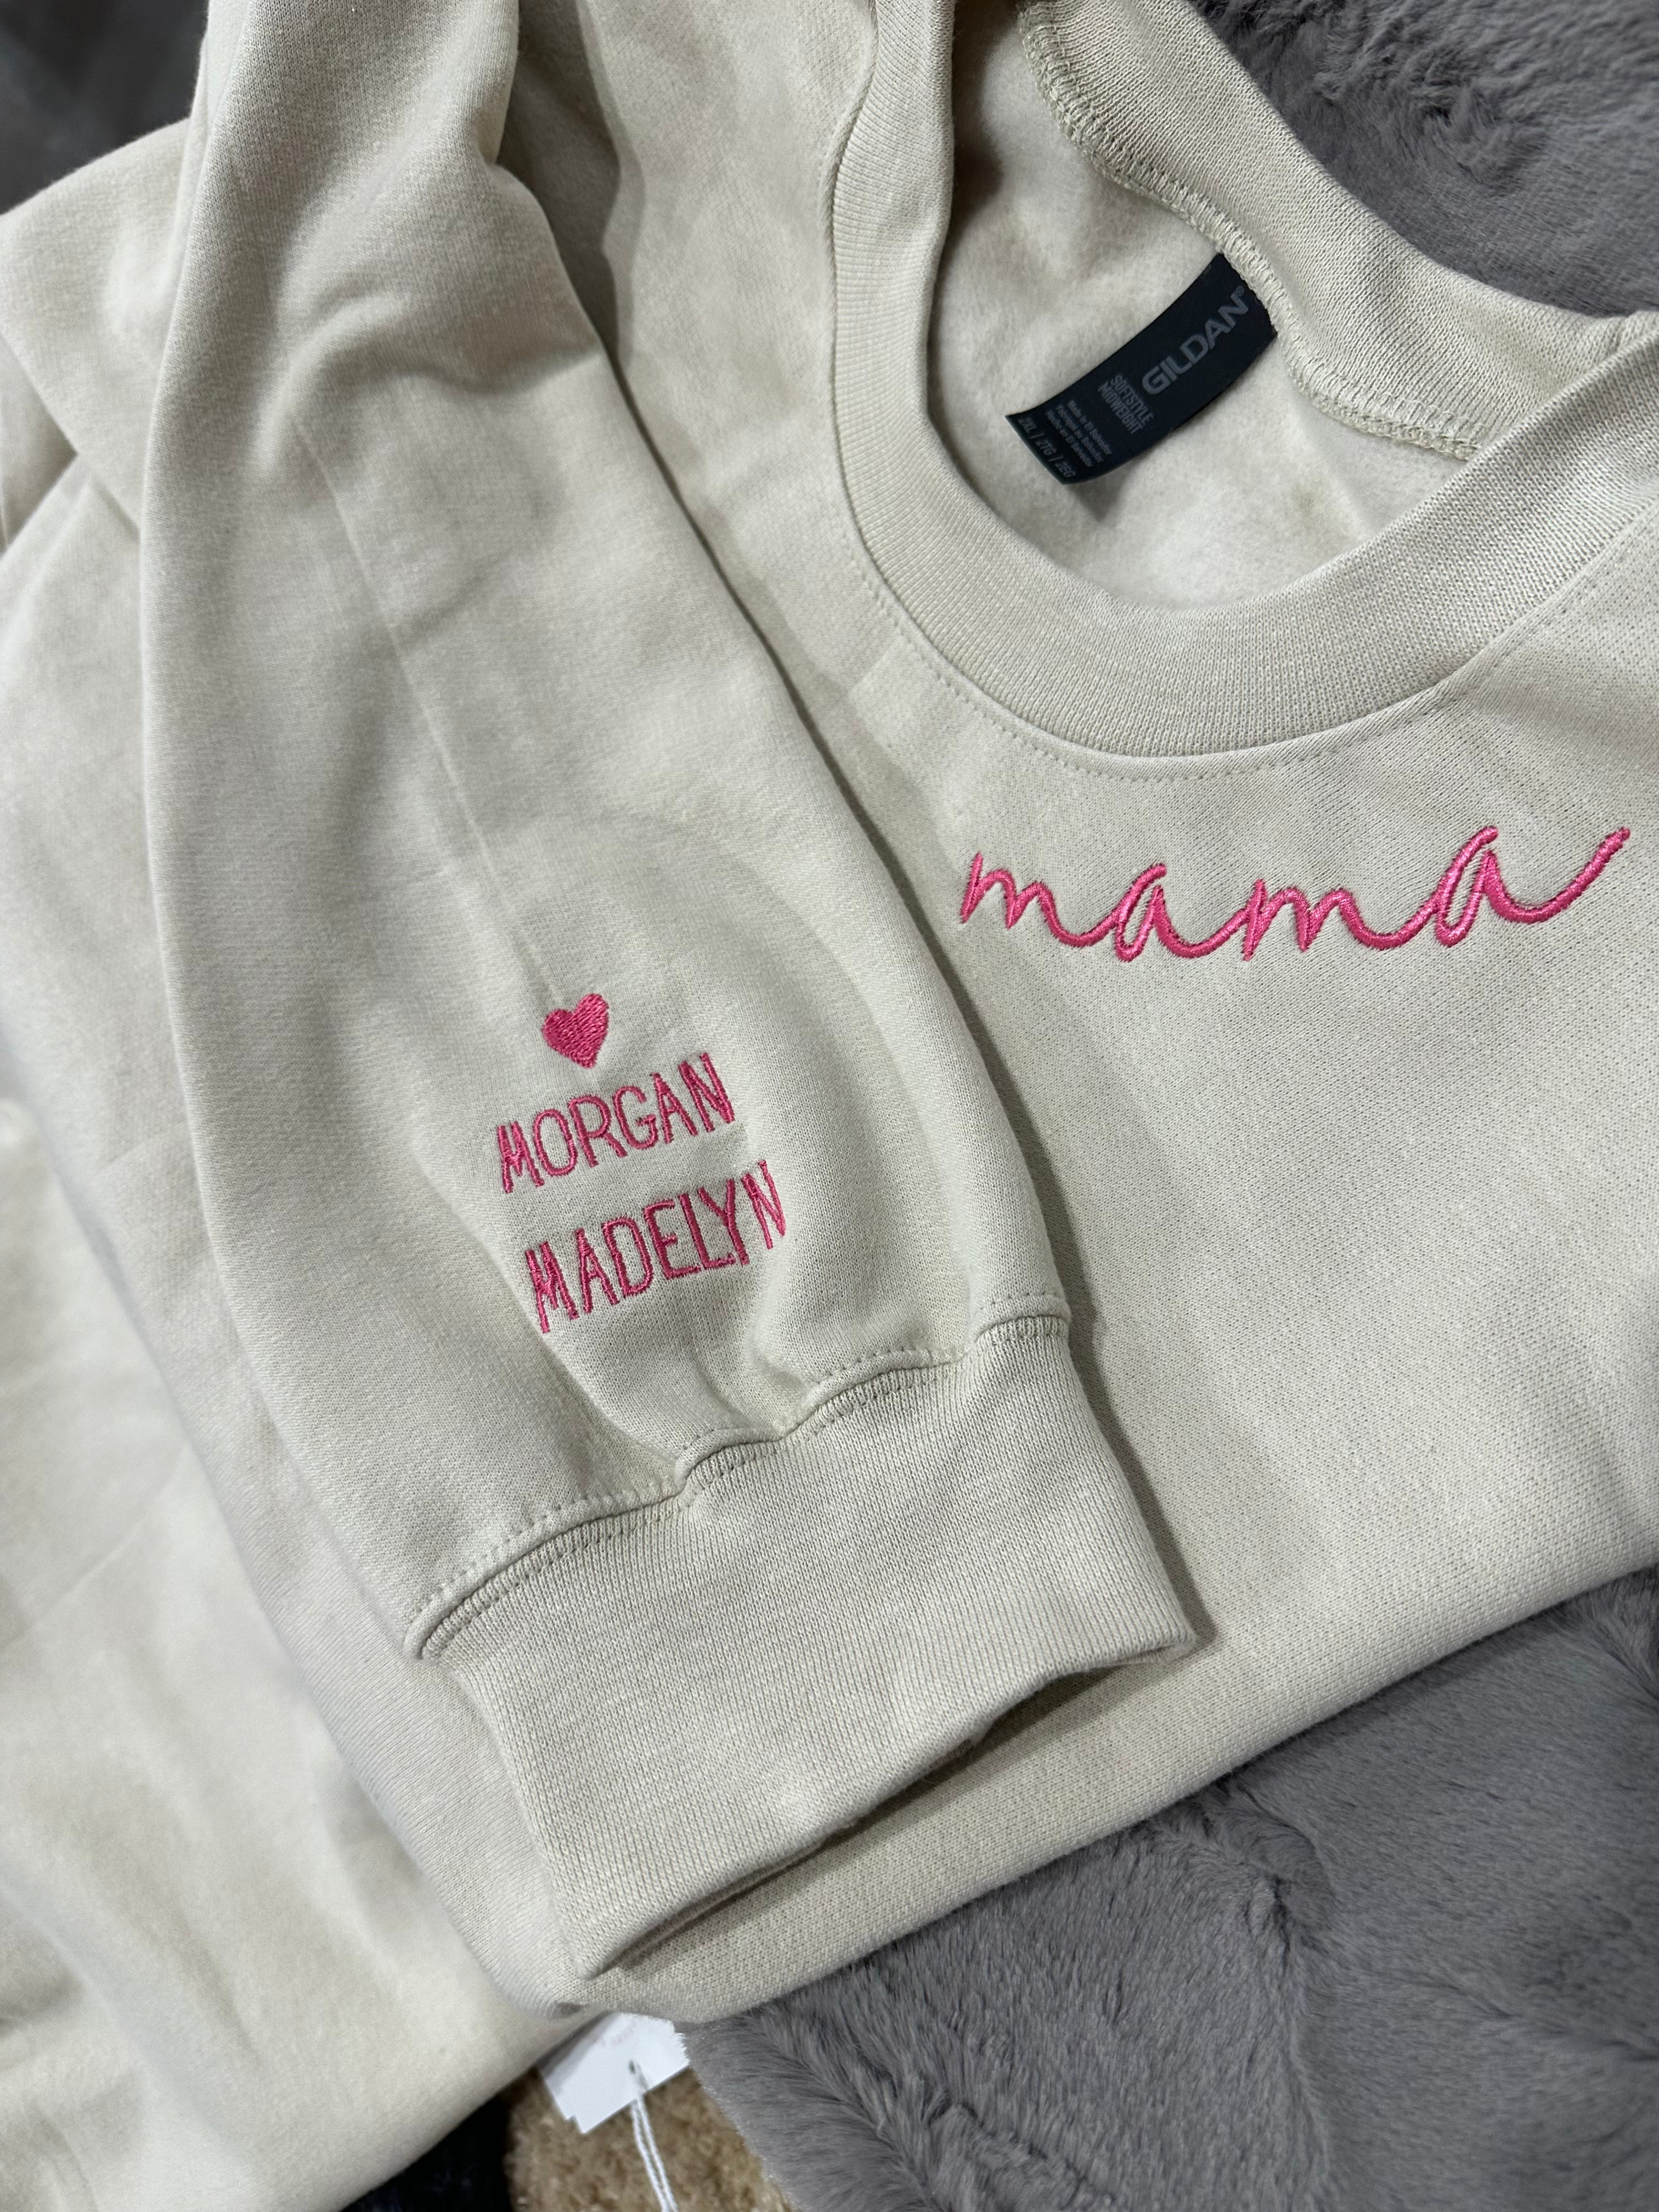 Custom Embroidered Scripty Font “mama” on the neckline T-Shirts